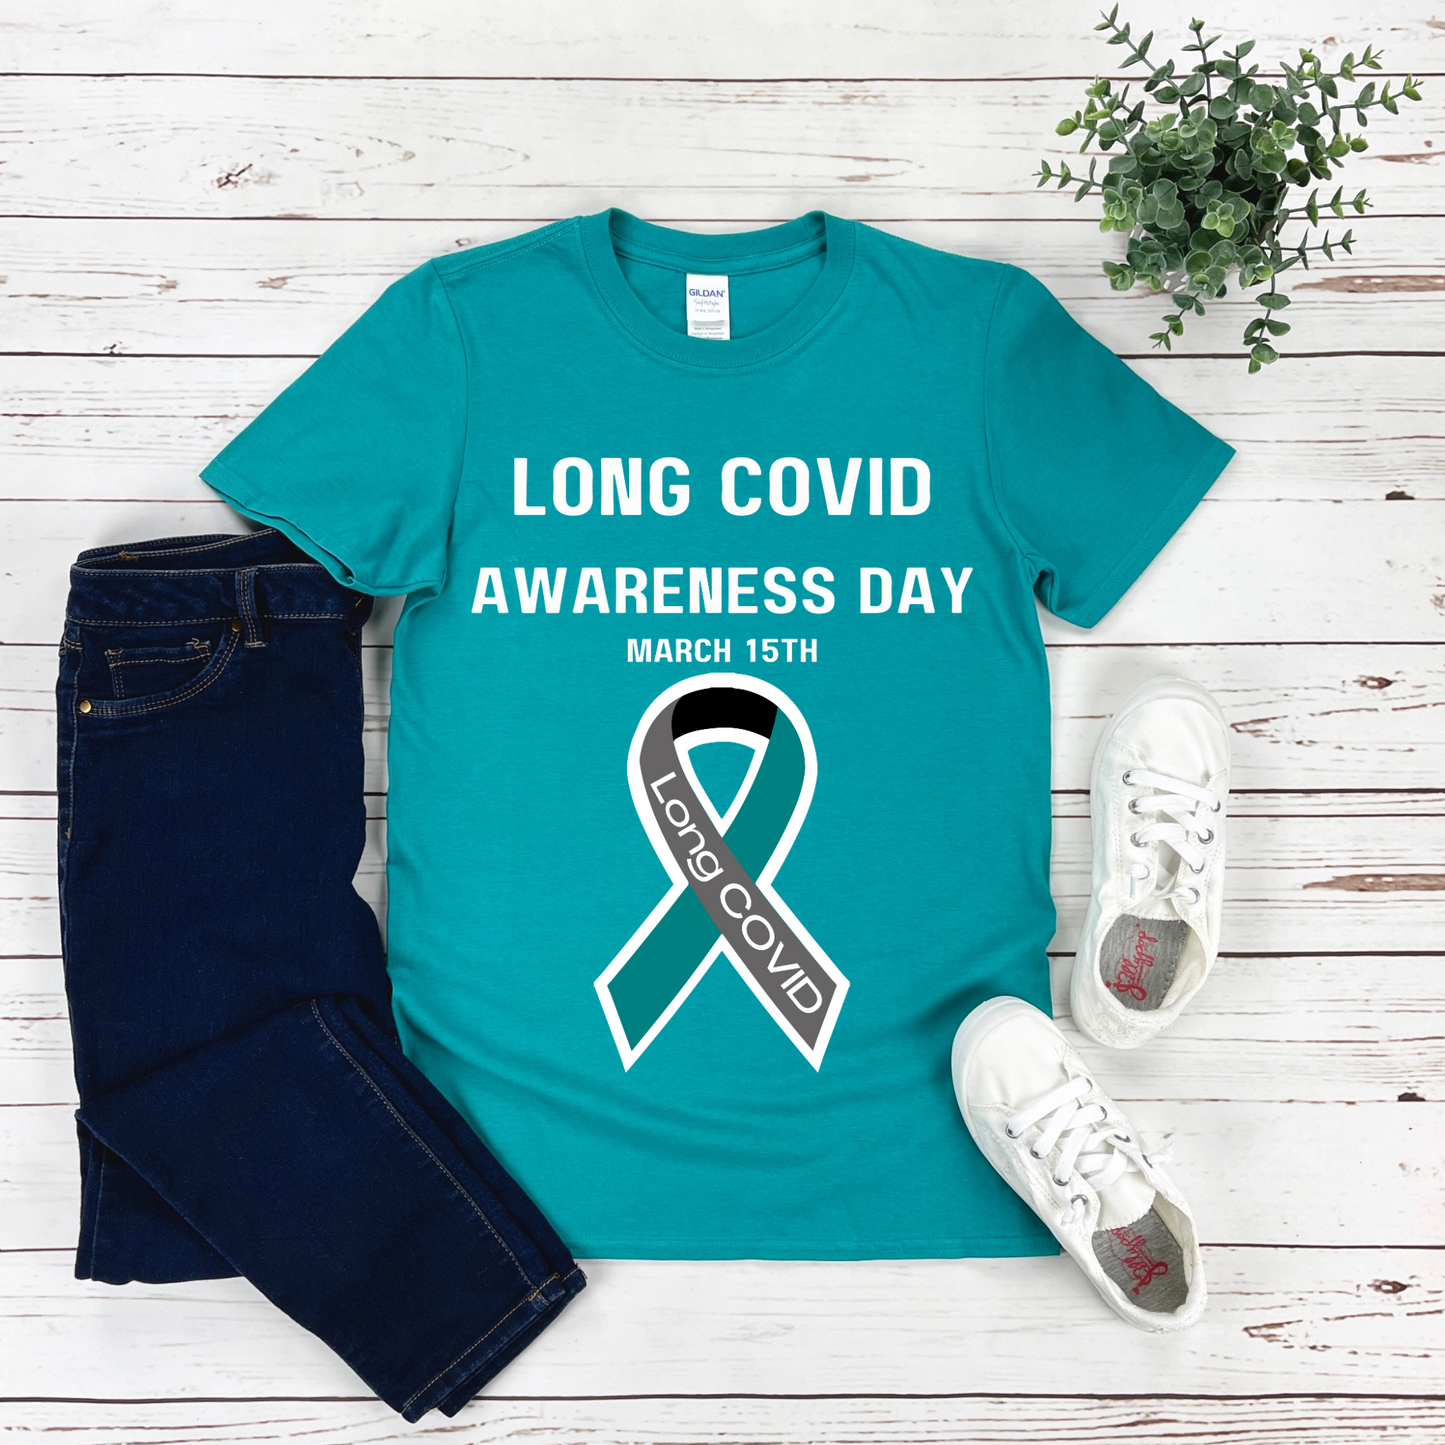 Teal Long Covid Awareness Day shirt with a black, white and teal ribbon.